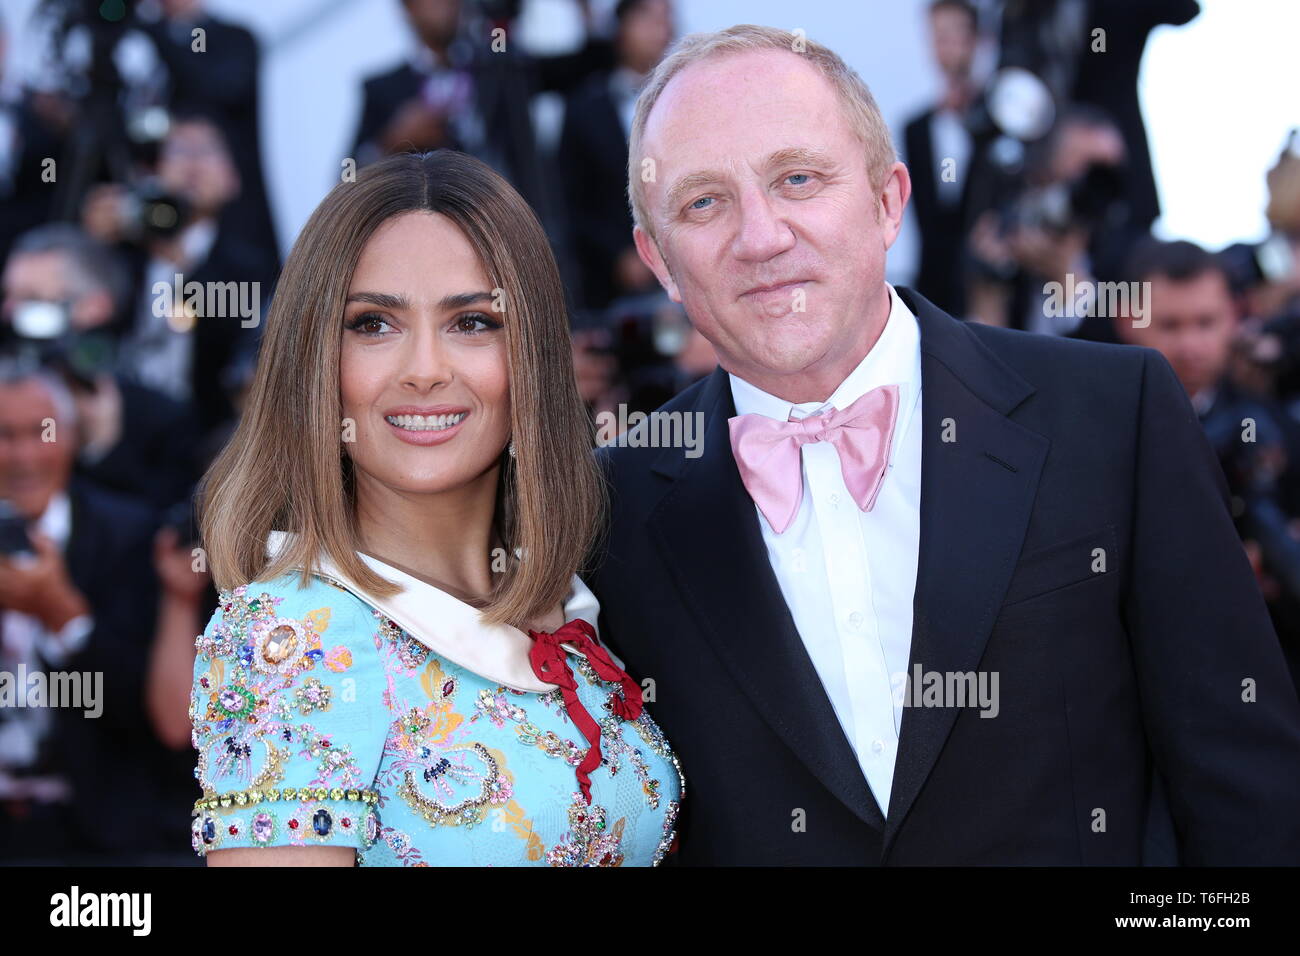 CANNES, FRANCE – MAY 24, 2017: Salma Hayek and Francois-Henri Pinault attend 'The Beguiled' screening in Cannes (Photo: Mickael Chavet) Stock Photo